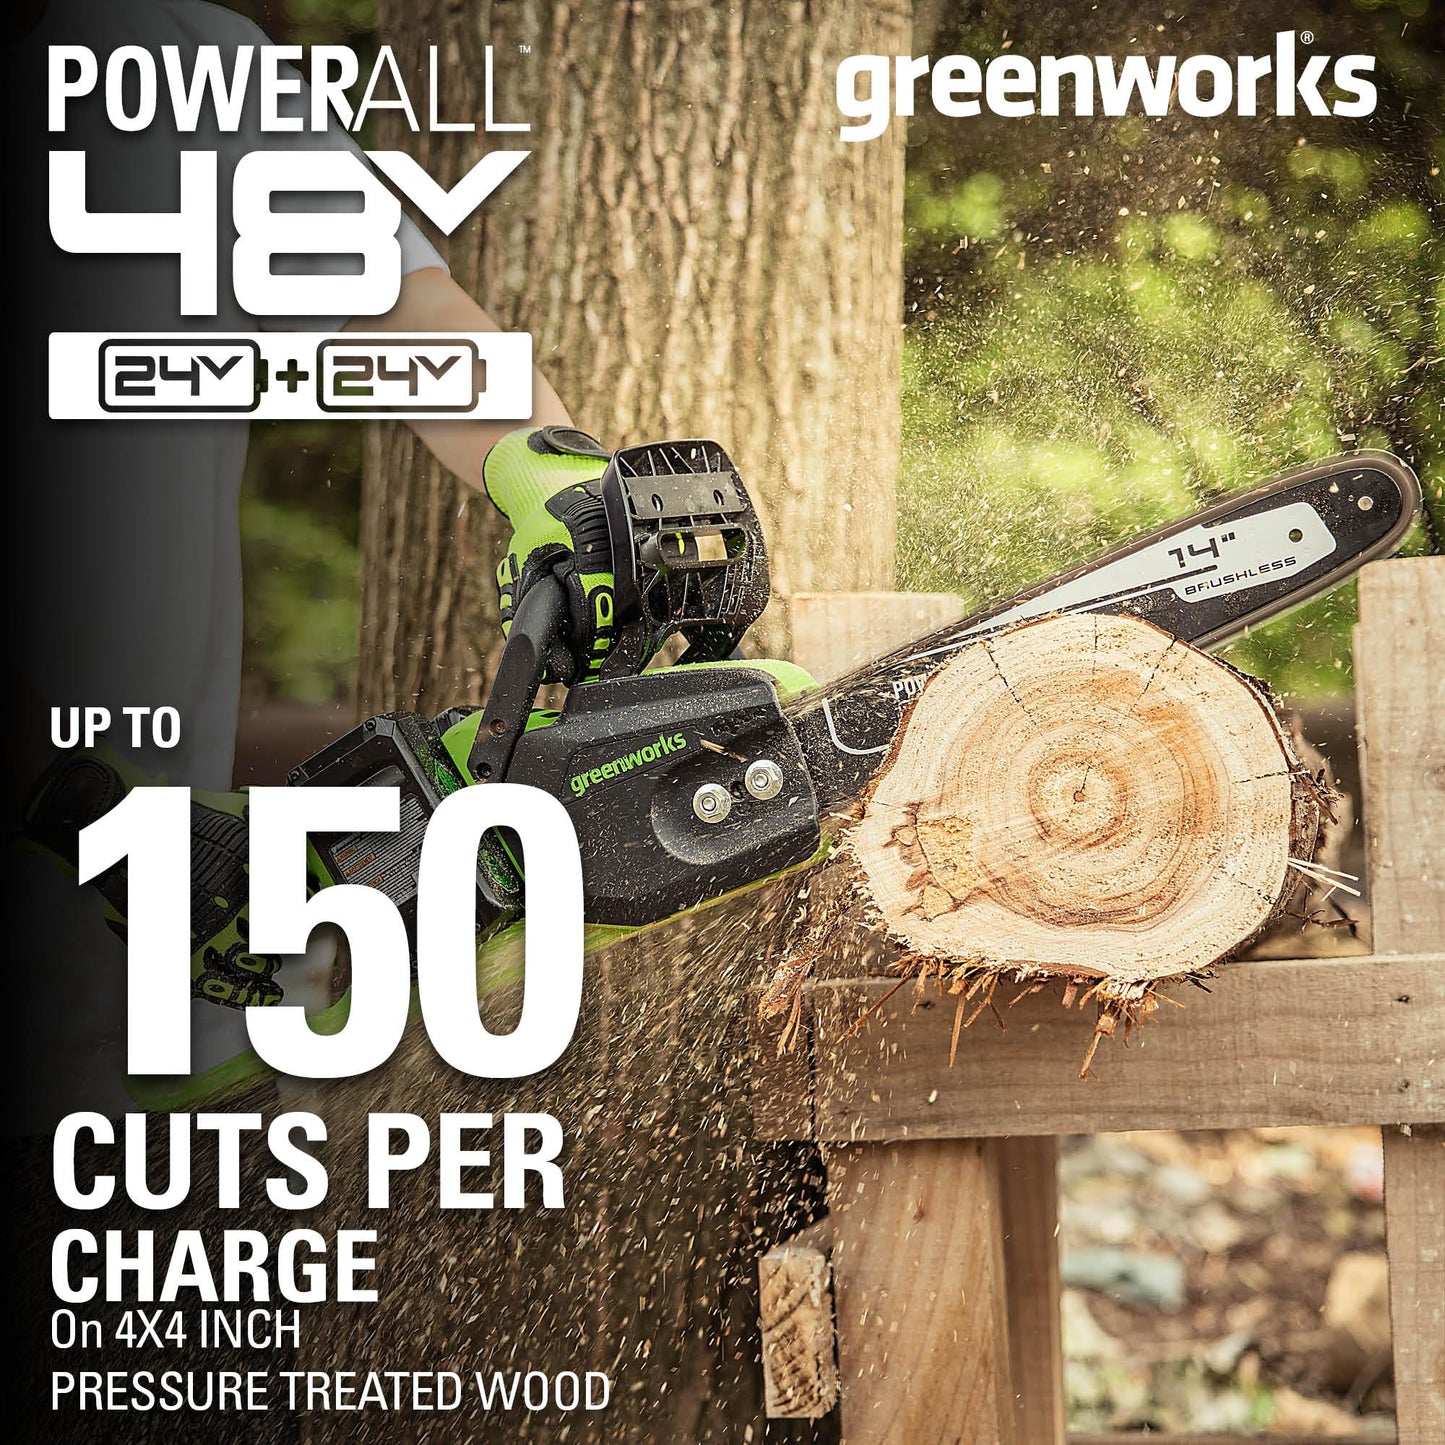 48V (2x24V) 16" Cordless Battery Chainsaw w/ Two (2) 4.0Ah USB Batteries & Dual Port Charger